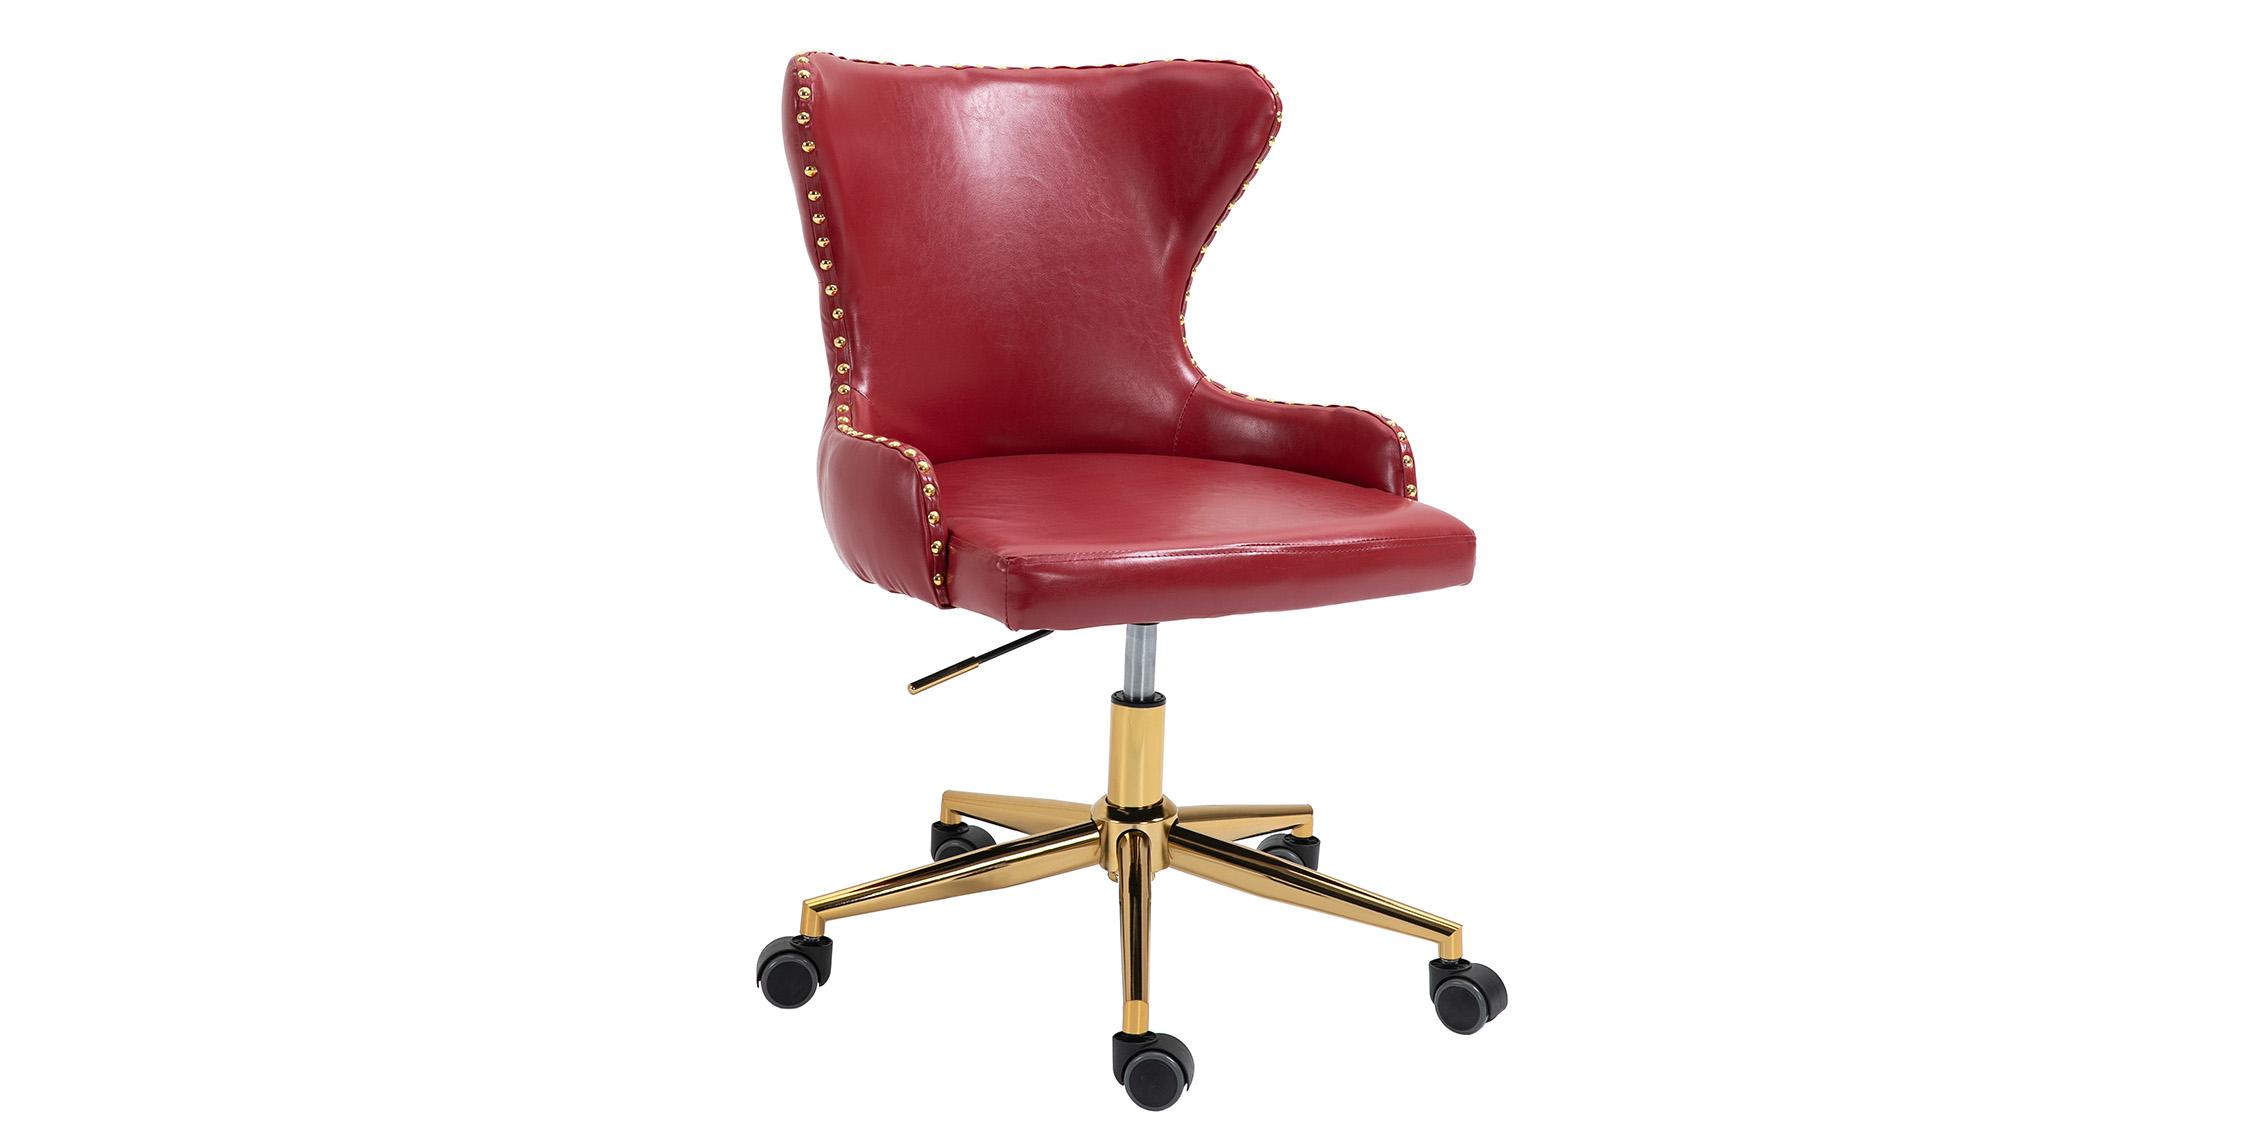 Contemporary, Modern Office Chair HENDRIX 167Red 167Red in Gold, Burgundy Faux Leather